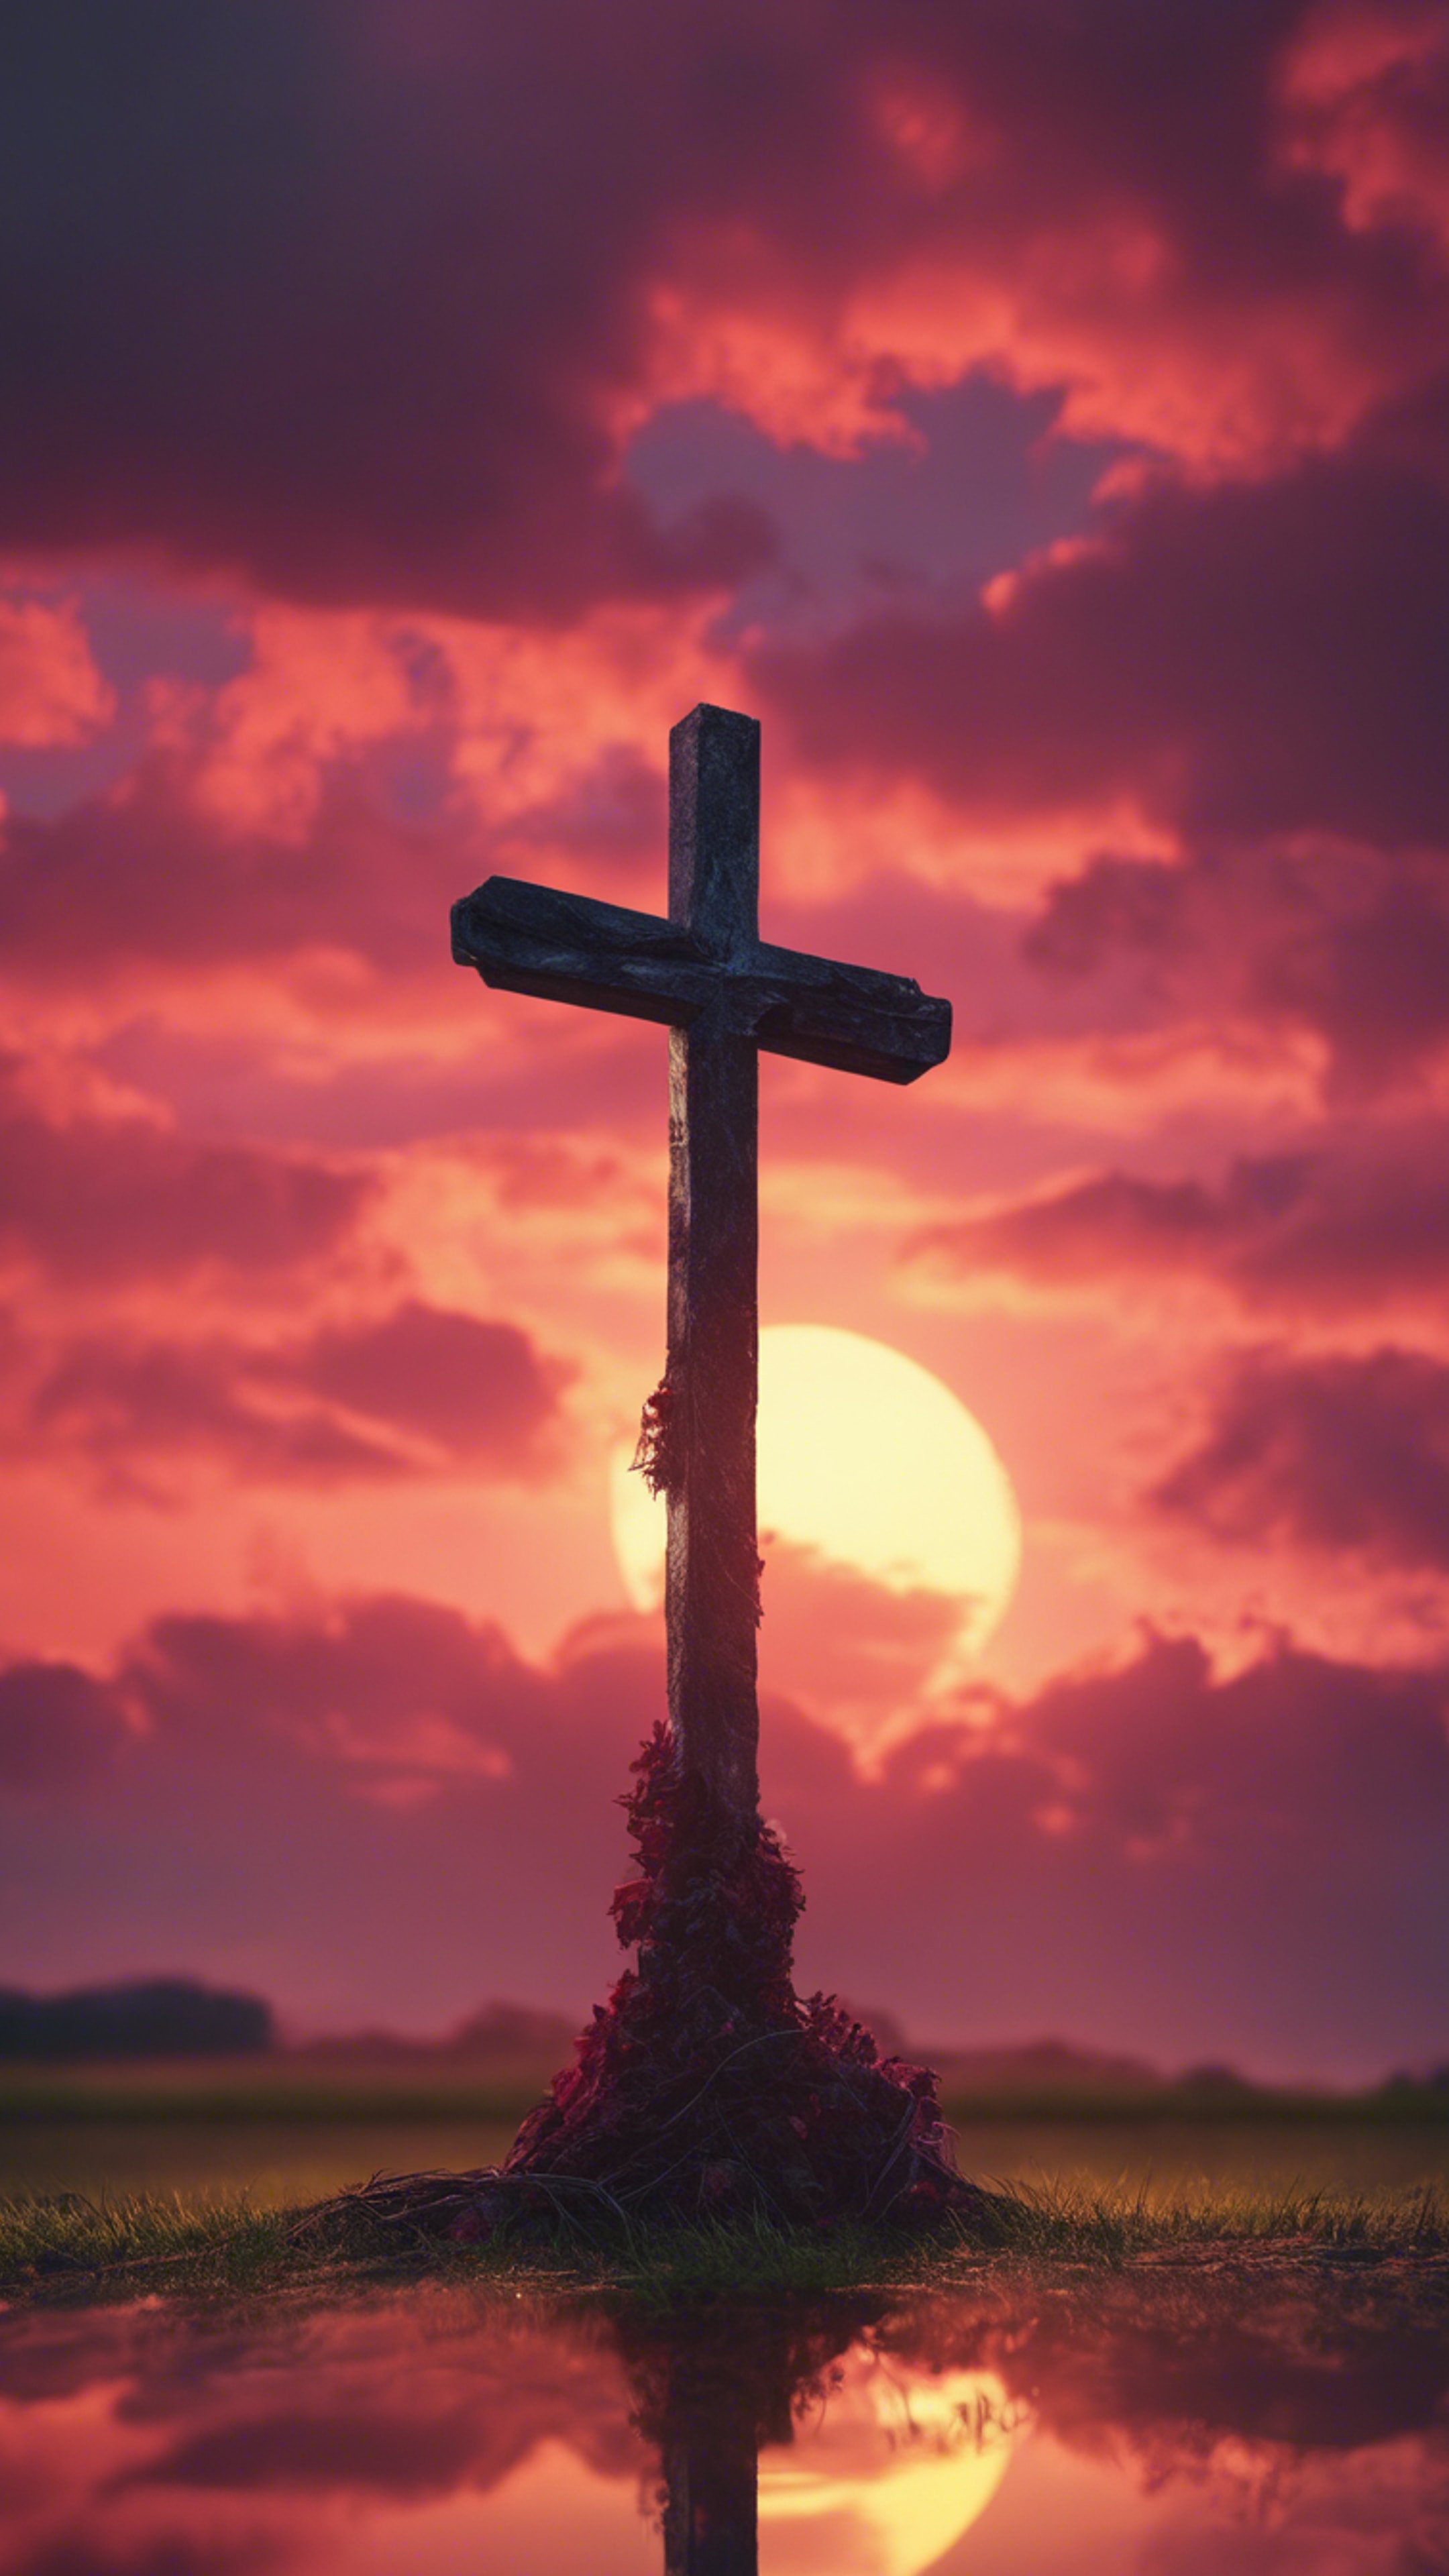 A cross standing against the crimson colors of a sunset sky. Ταπετσαρία[b41808c7967b41aa9e40]